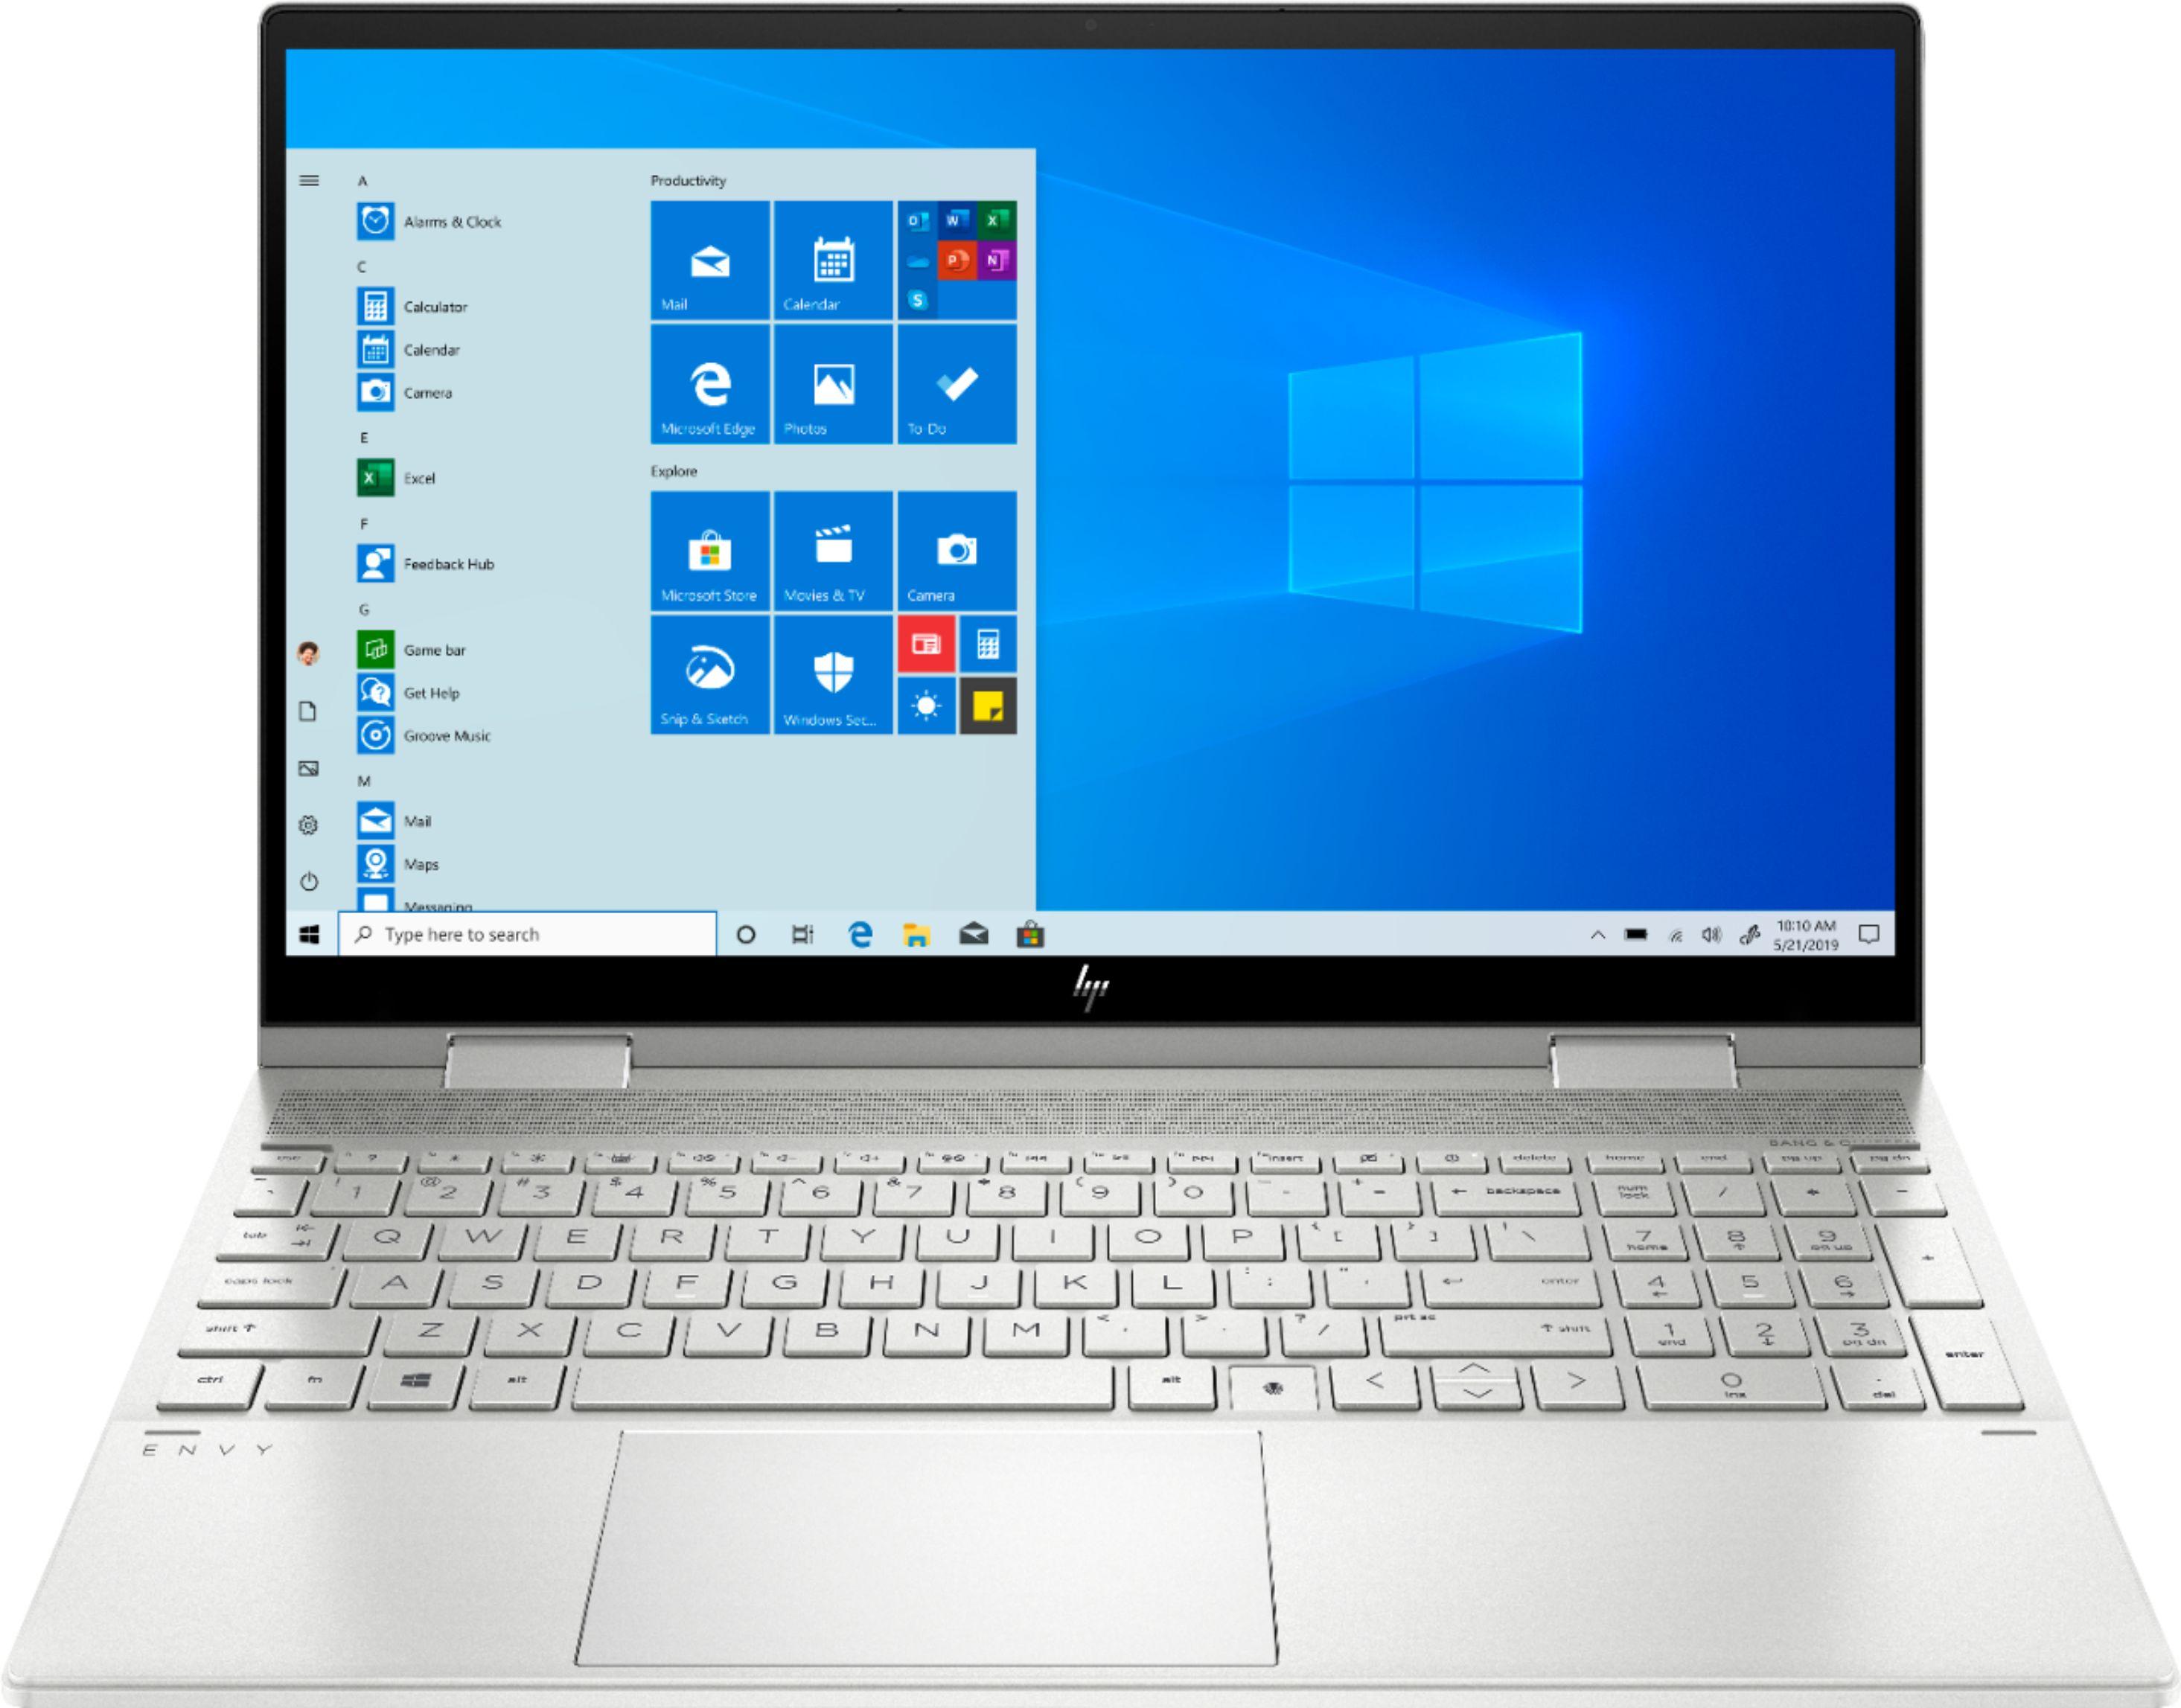 HP Envy x360 2-in-1 15.6in i5 8GB 256GB Notebook Laptop for $699.99 Shipped